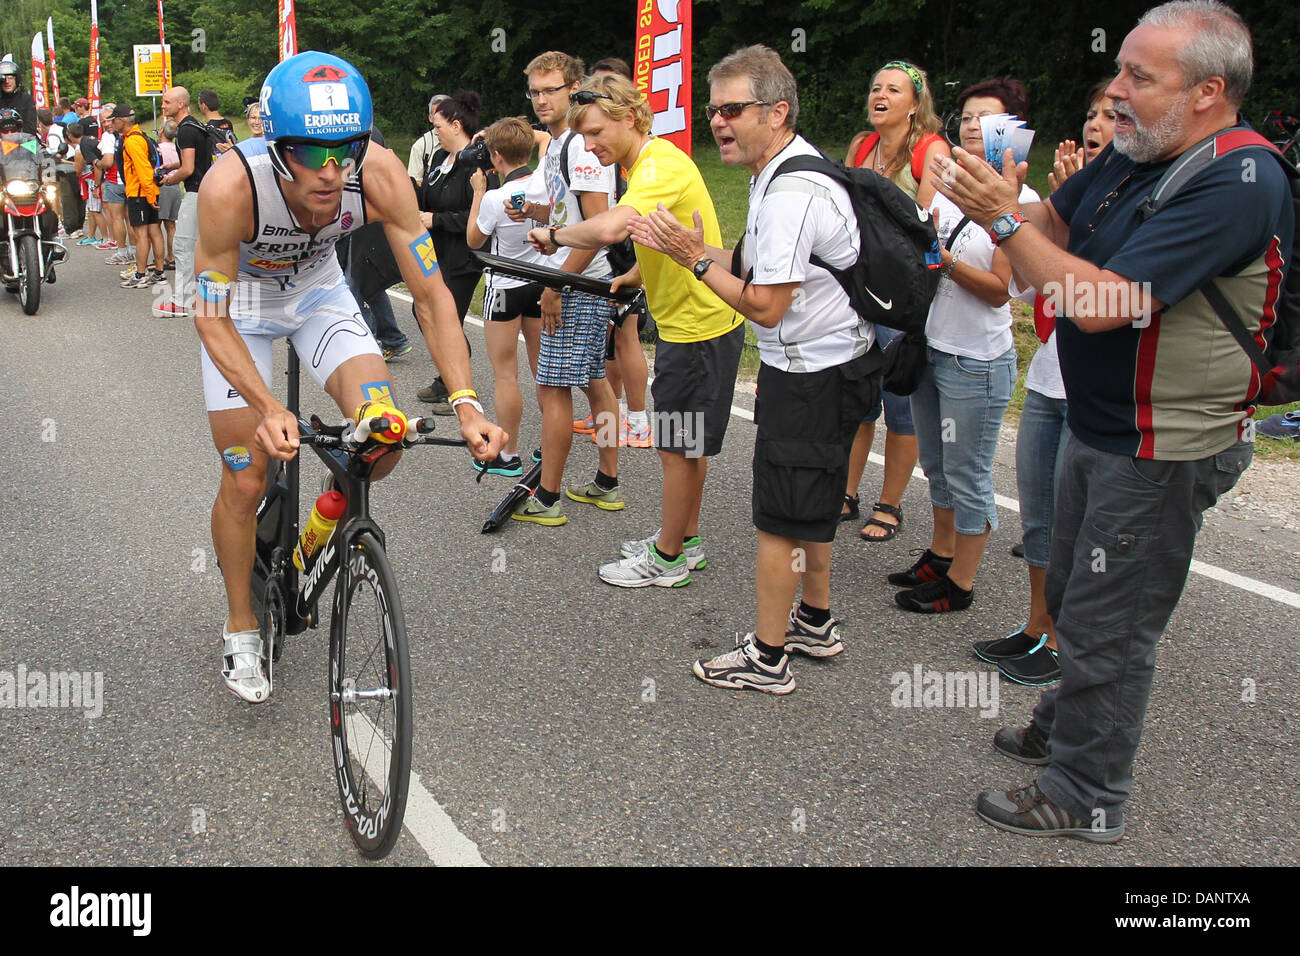 German triathlete Andreas Raelert gets on his bike after the swimming etappe during the 10th Ironman Challenge in Roth, Germany, 10 July 2011. For the ironman, the participants have to swim 3,8 km, cycle 180 km and run 42,195 km. Photo: Daniel Karmann Stock Photo